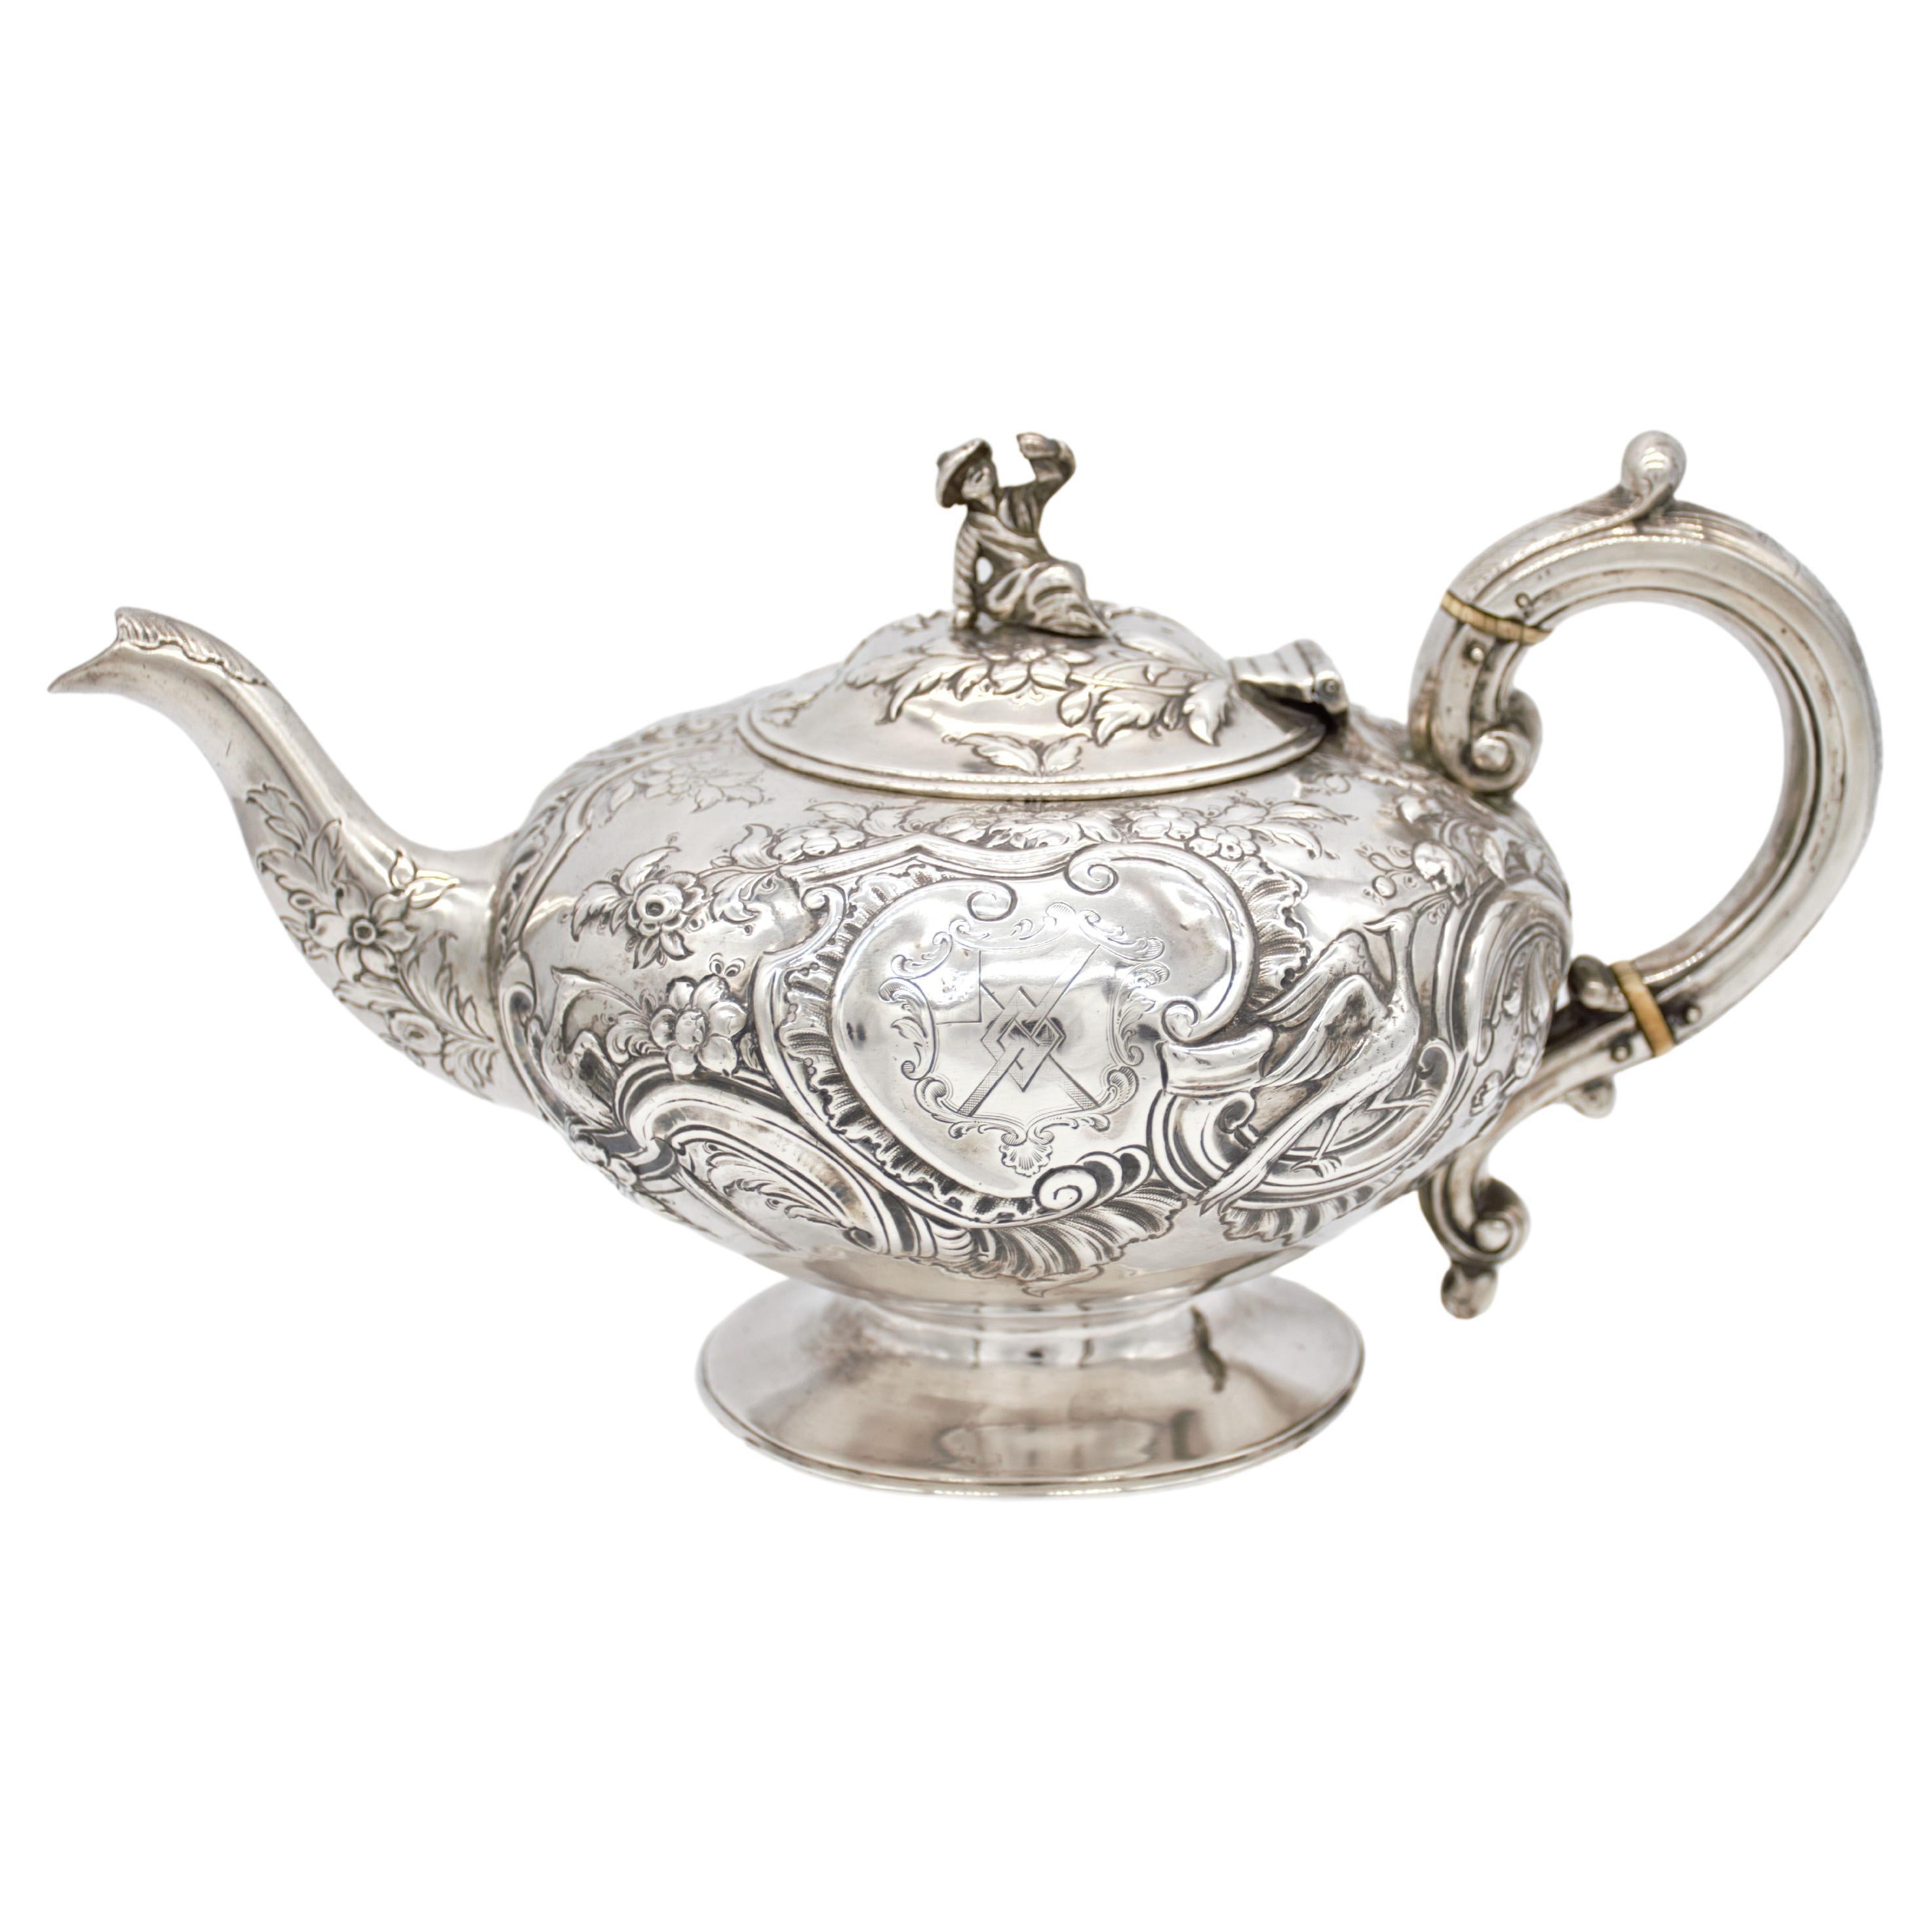 exceptional George III teapot by preeminent silversmith Paul Storr, 1793 For Sale